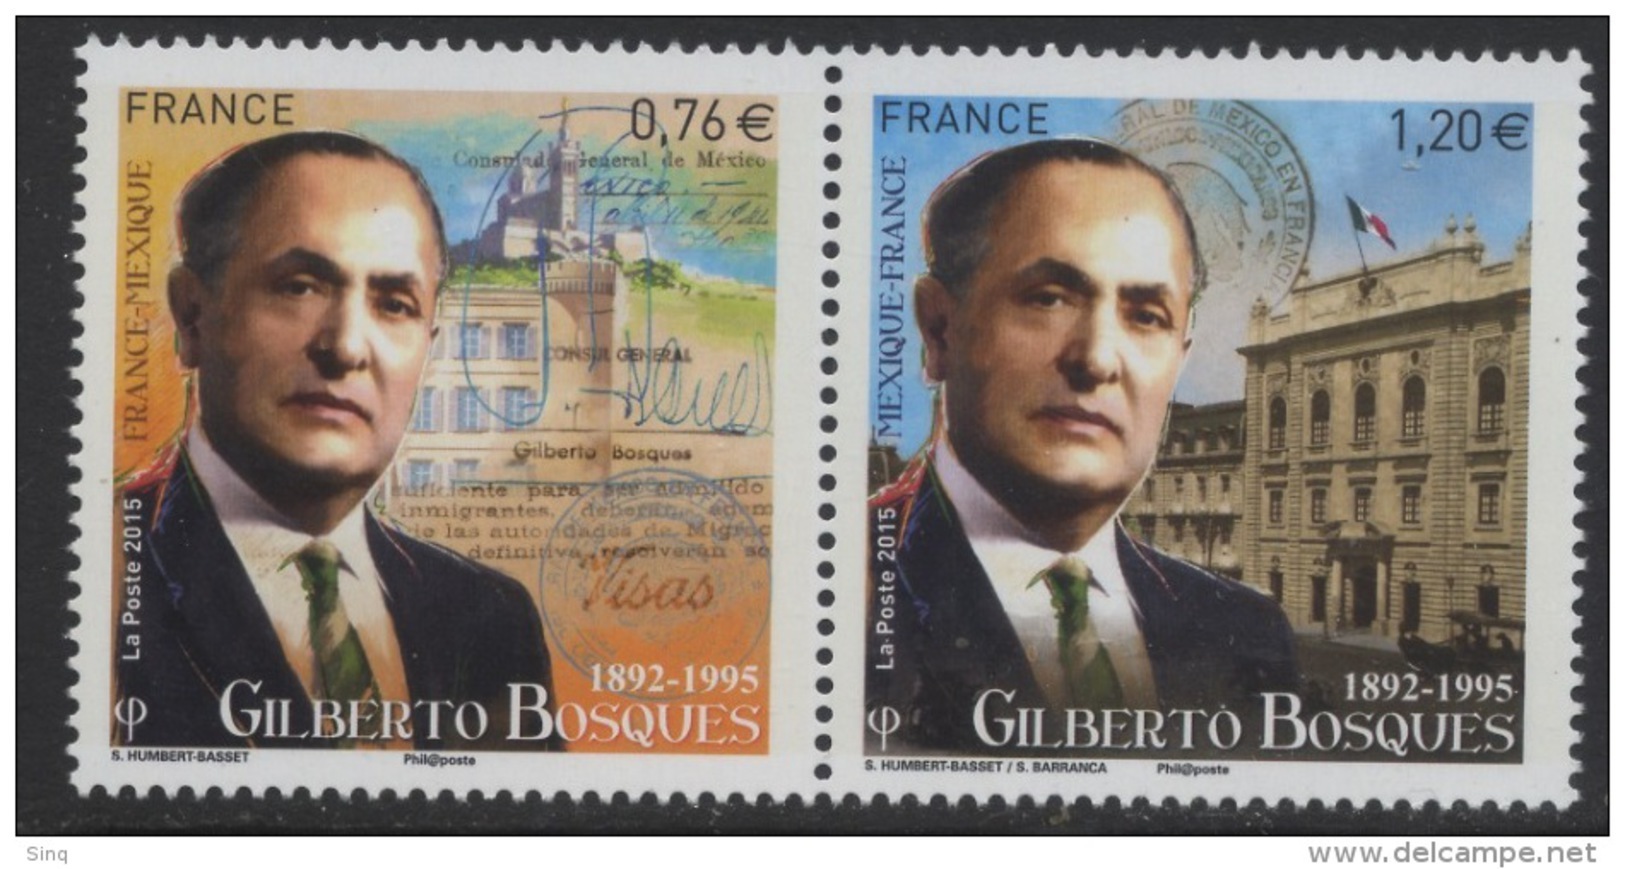 N° 4970 & 4971 Gilberto Bosques Faciale 0,76 + 1,20 € - Unused Stamps